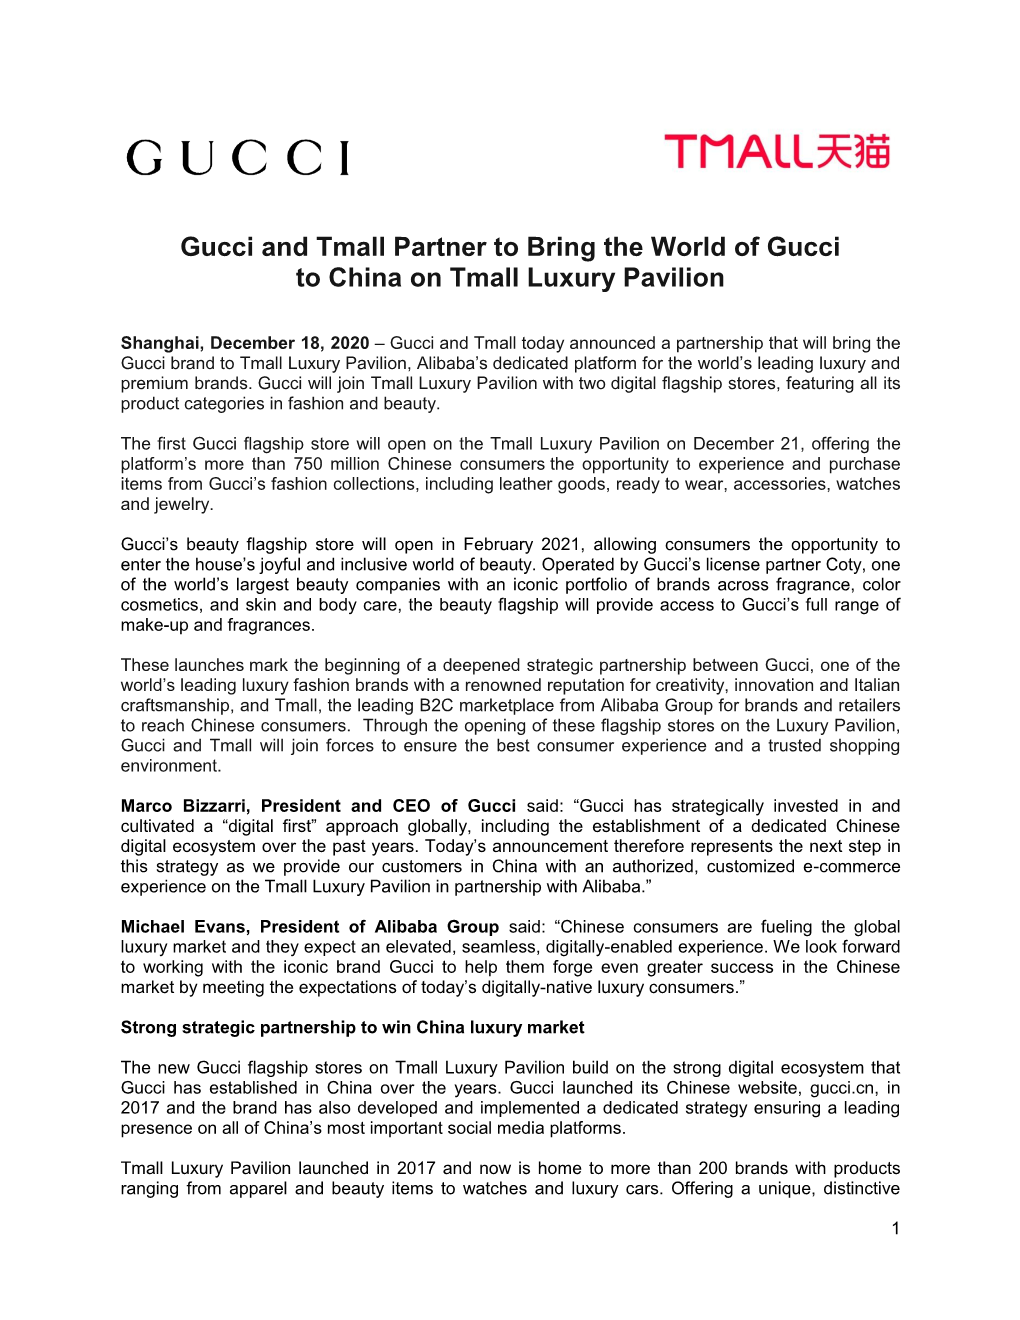 Gucci and Tmall Partner to Bring the World of Gucci to China on Tmall Luxury Pavilion